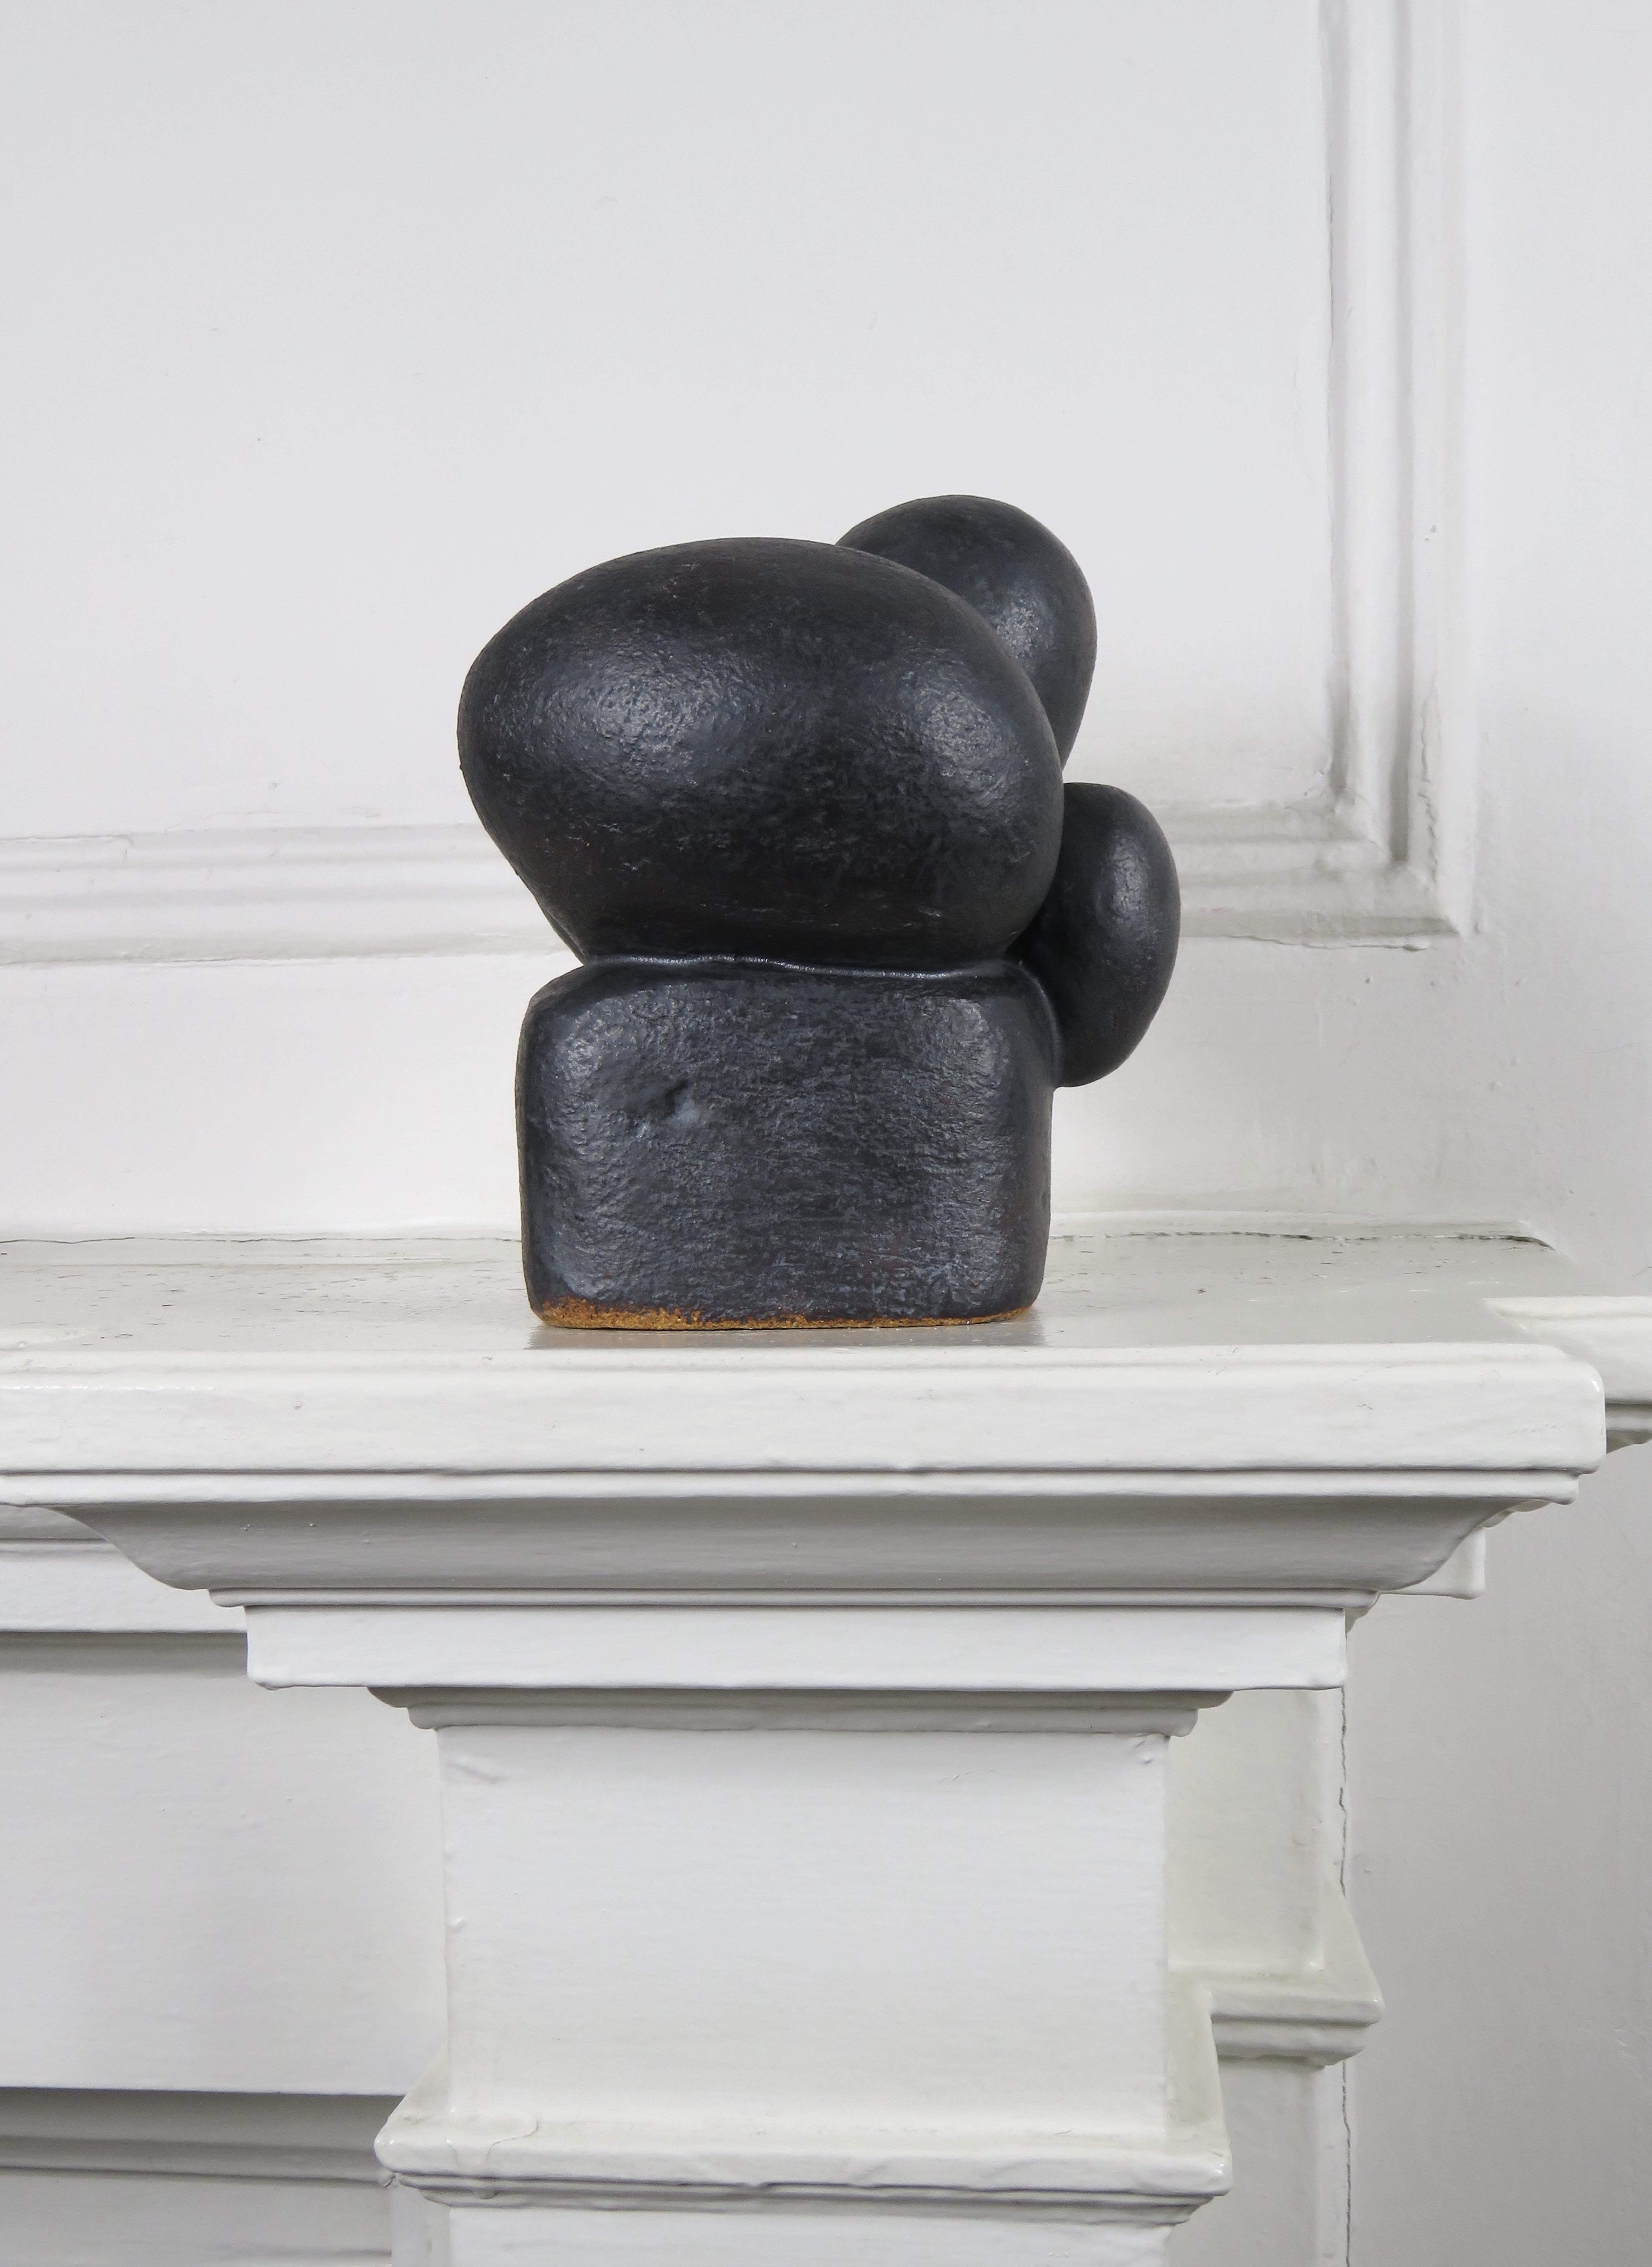 Fired Organic Bulbous Pods with Cube Base, Hand Built Black Metallic Ceramic Stoneware